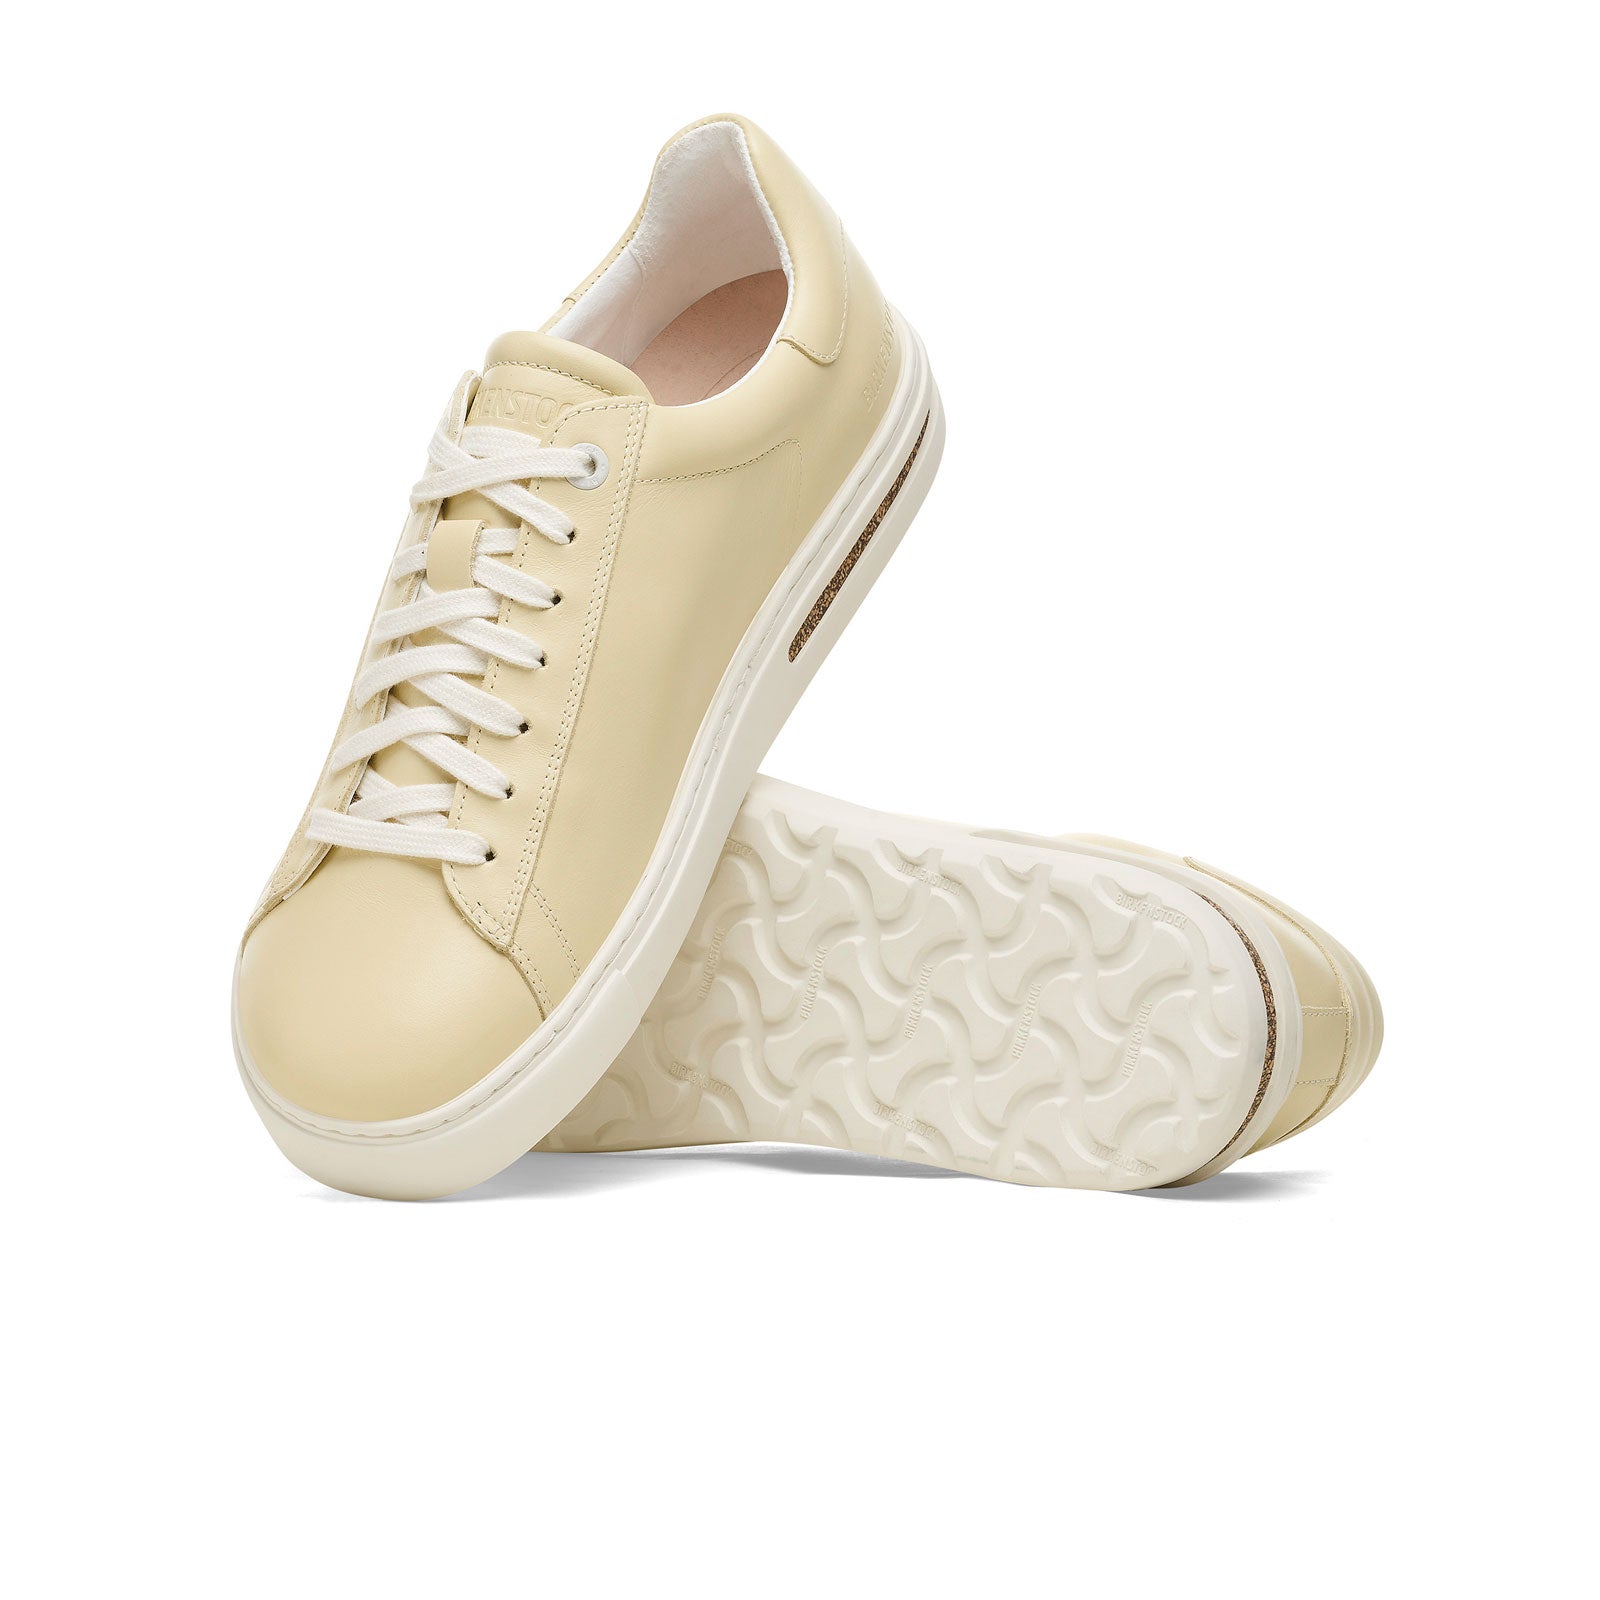 Bend Leather Sneaker - White | Leather sneakers women, White leather shoes,  Leather sneakers